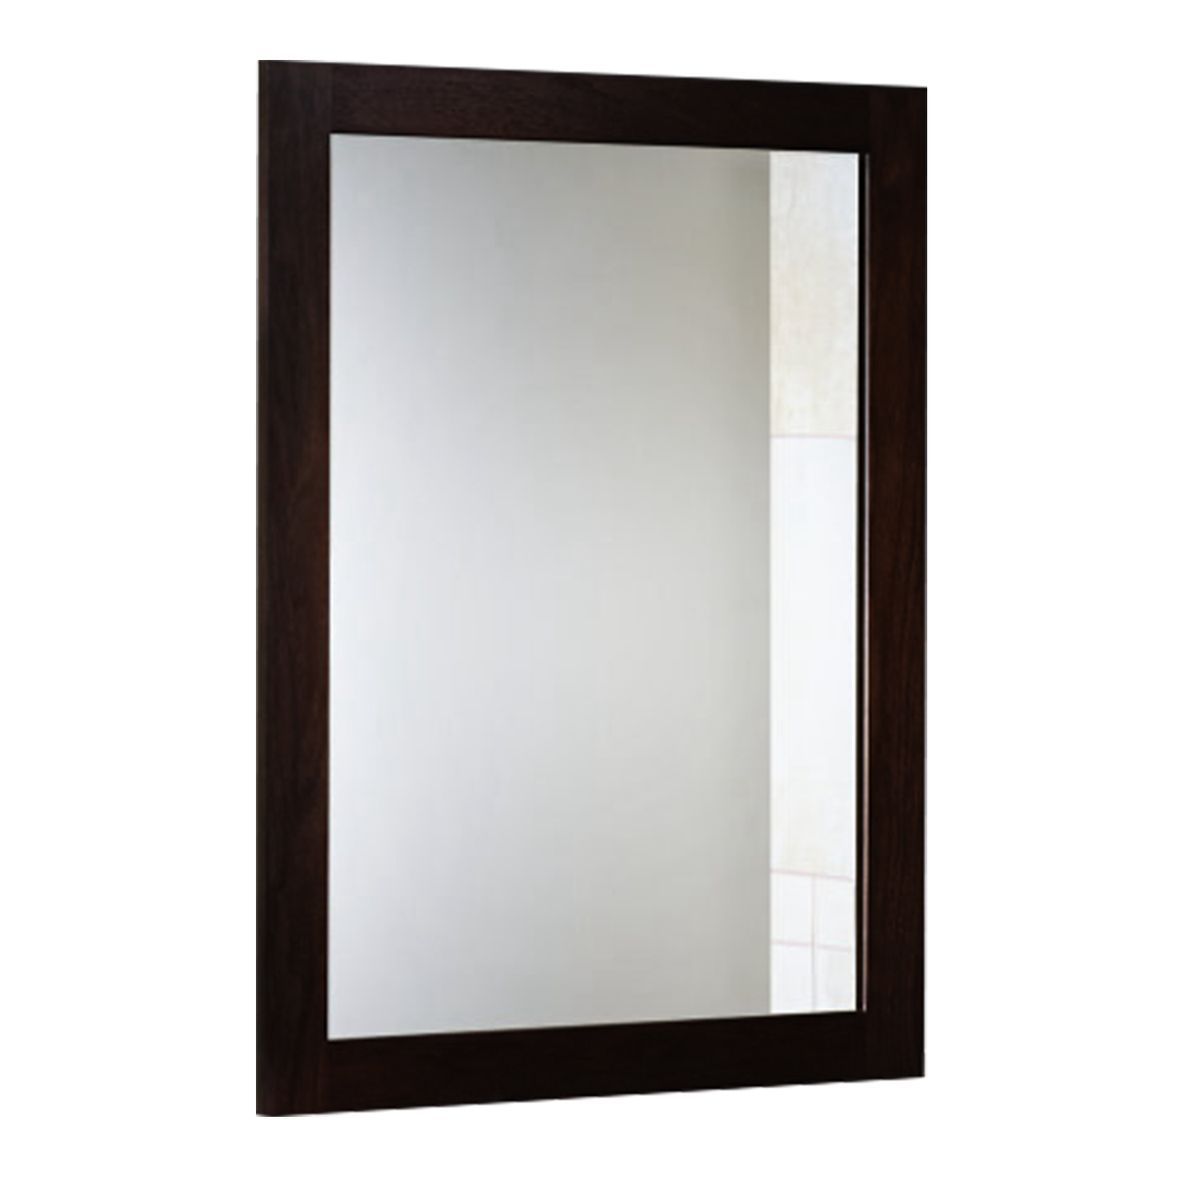 Photos - Wall Mirror New Home NewHome NewHome Wall Mounted Mirror - NewHome Wall Mounted Mirror B HGMIRR 